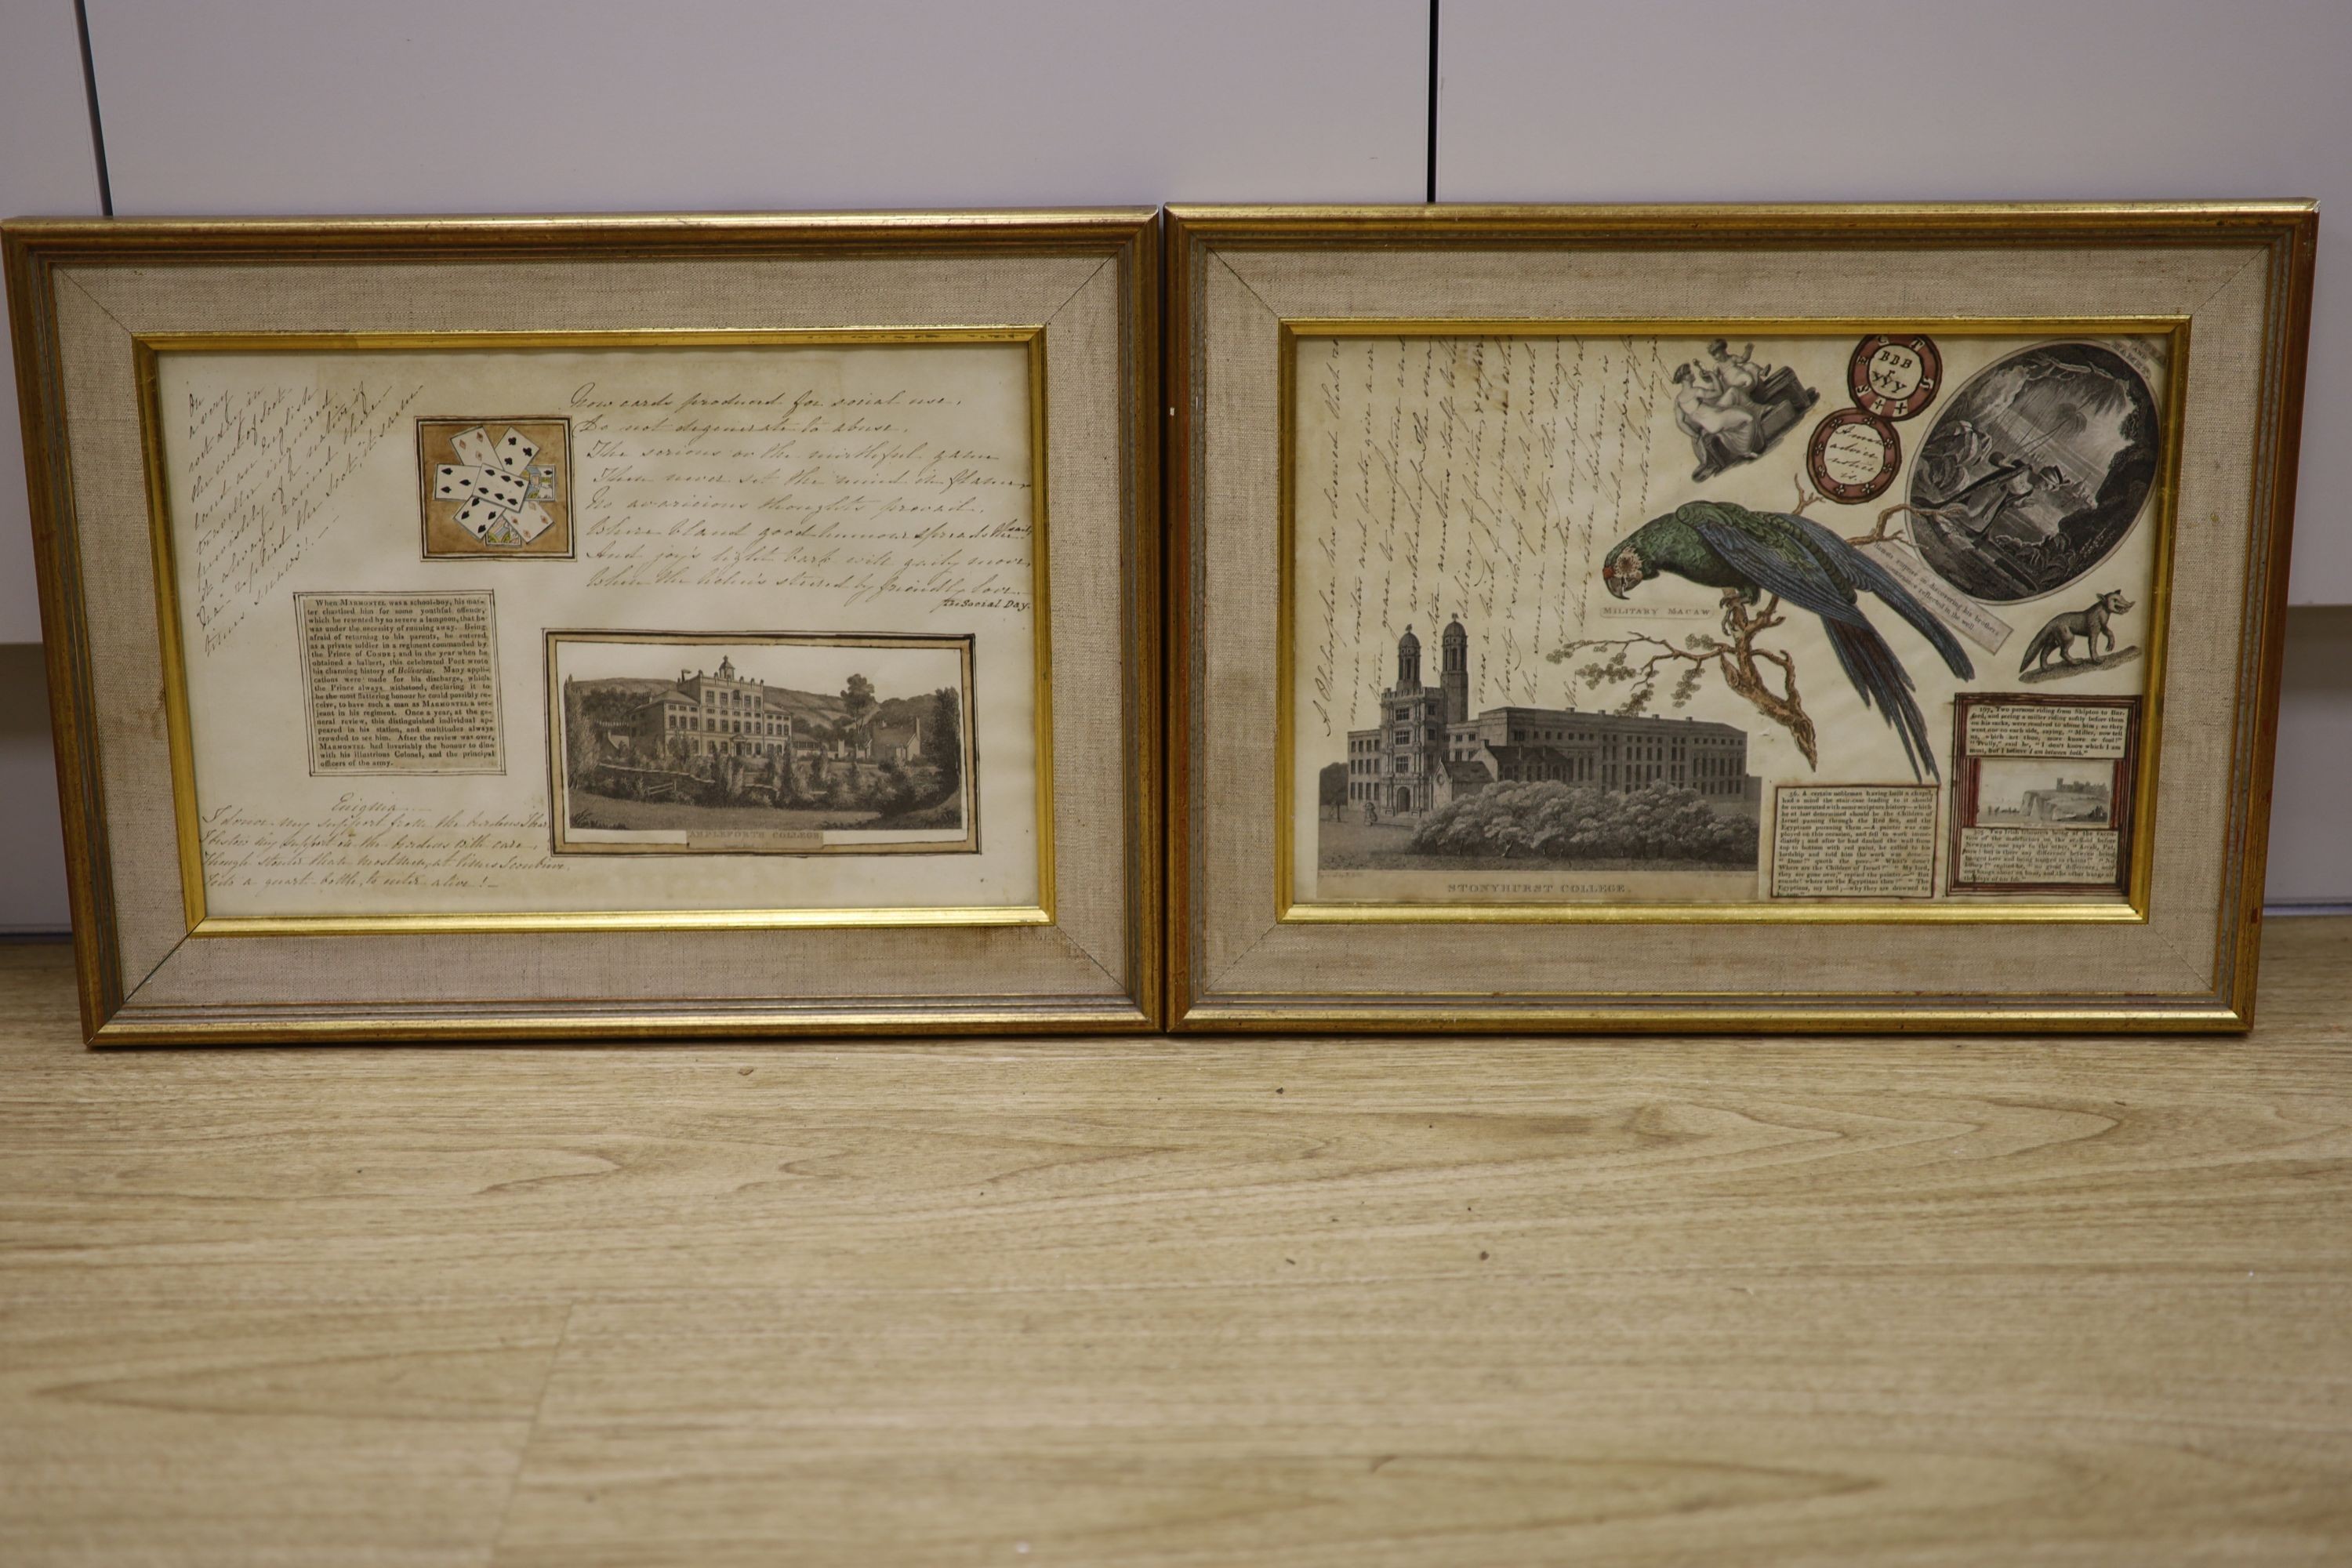 19th century English School, set of clin d’oeuil watercolour and collage panels, Poems, verses, - Image 5 of 8